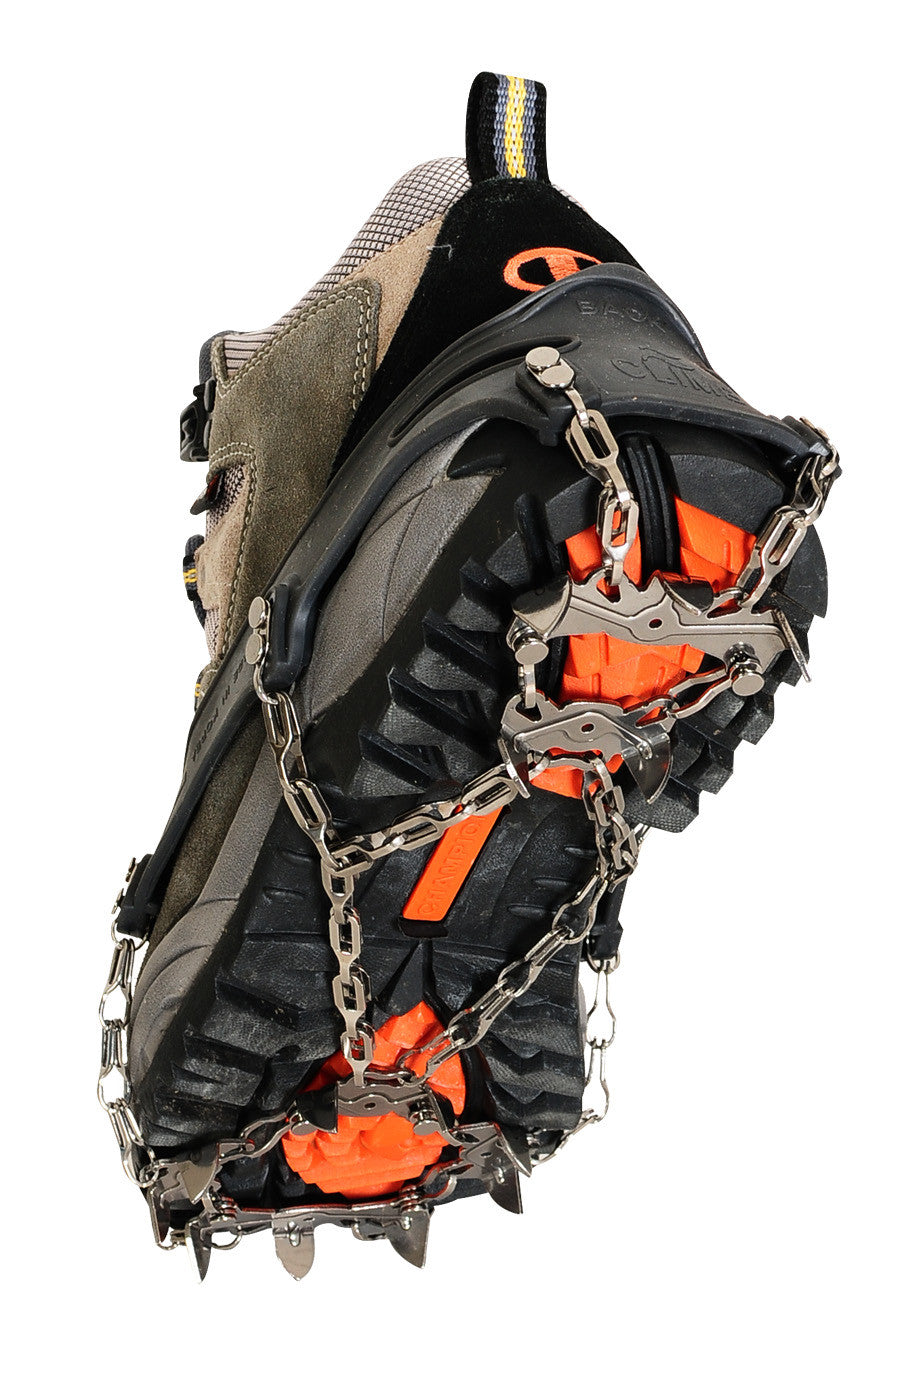 Winter Shoe Traction - What Makes Great Trail Spikes or Ice Spikes for –  Yatta Life Inc